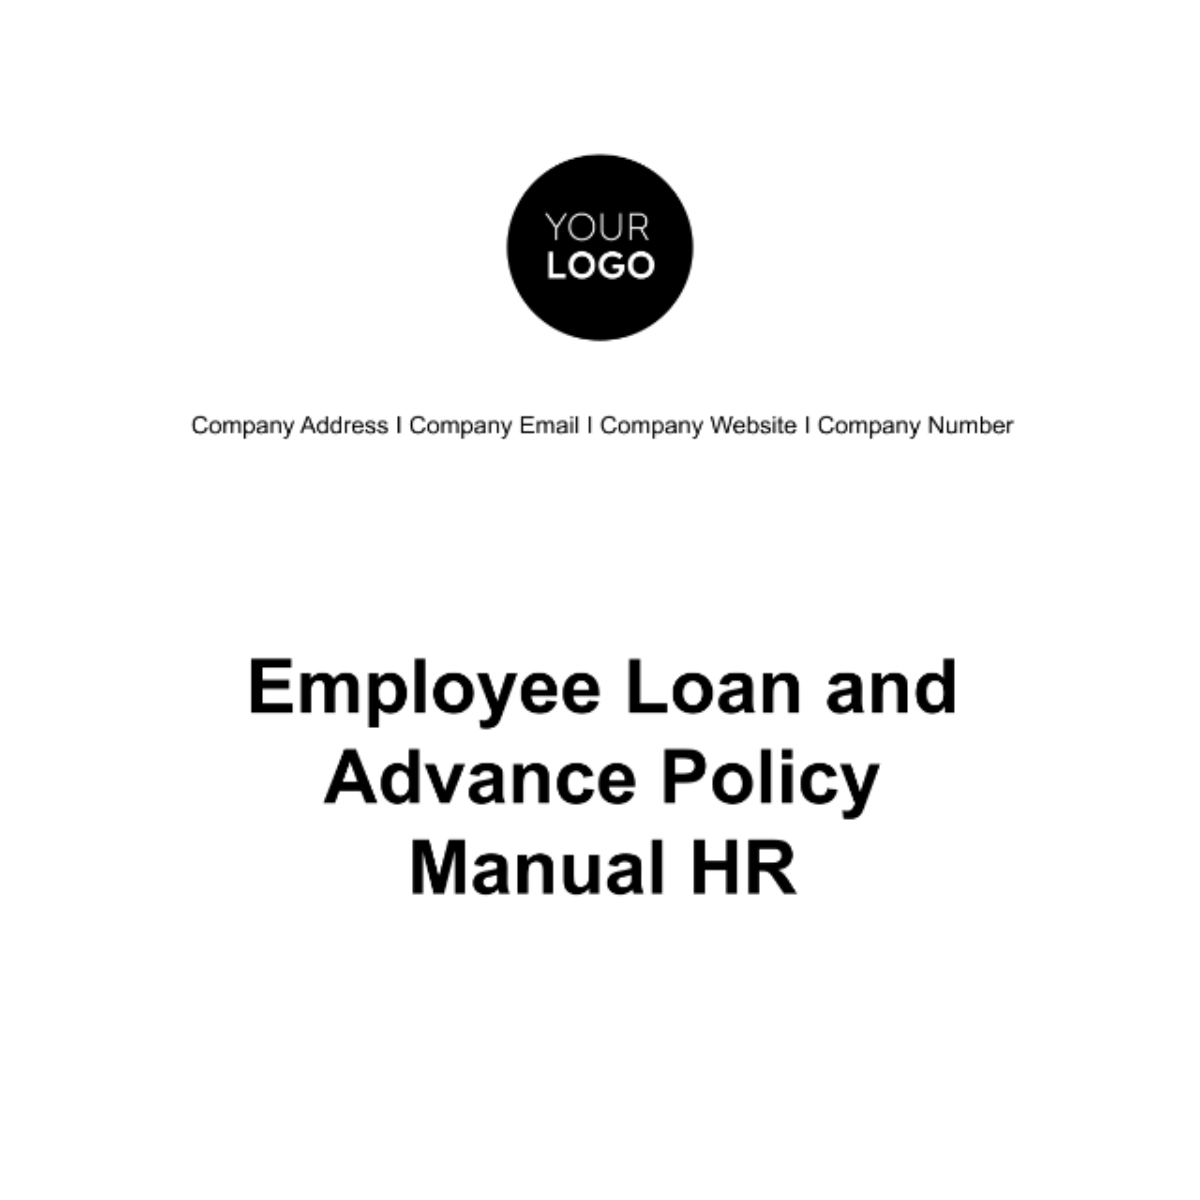 Employee Loan and Advance Policy Manual HR Template